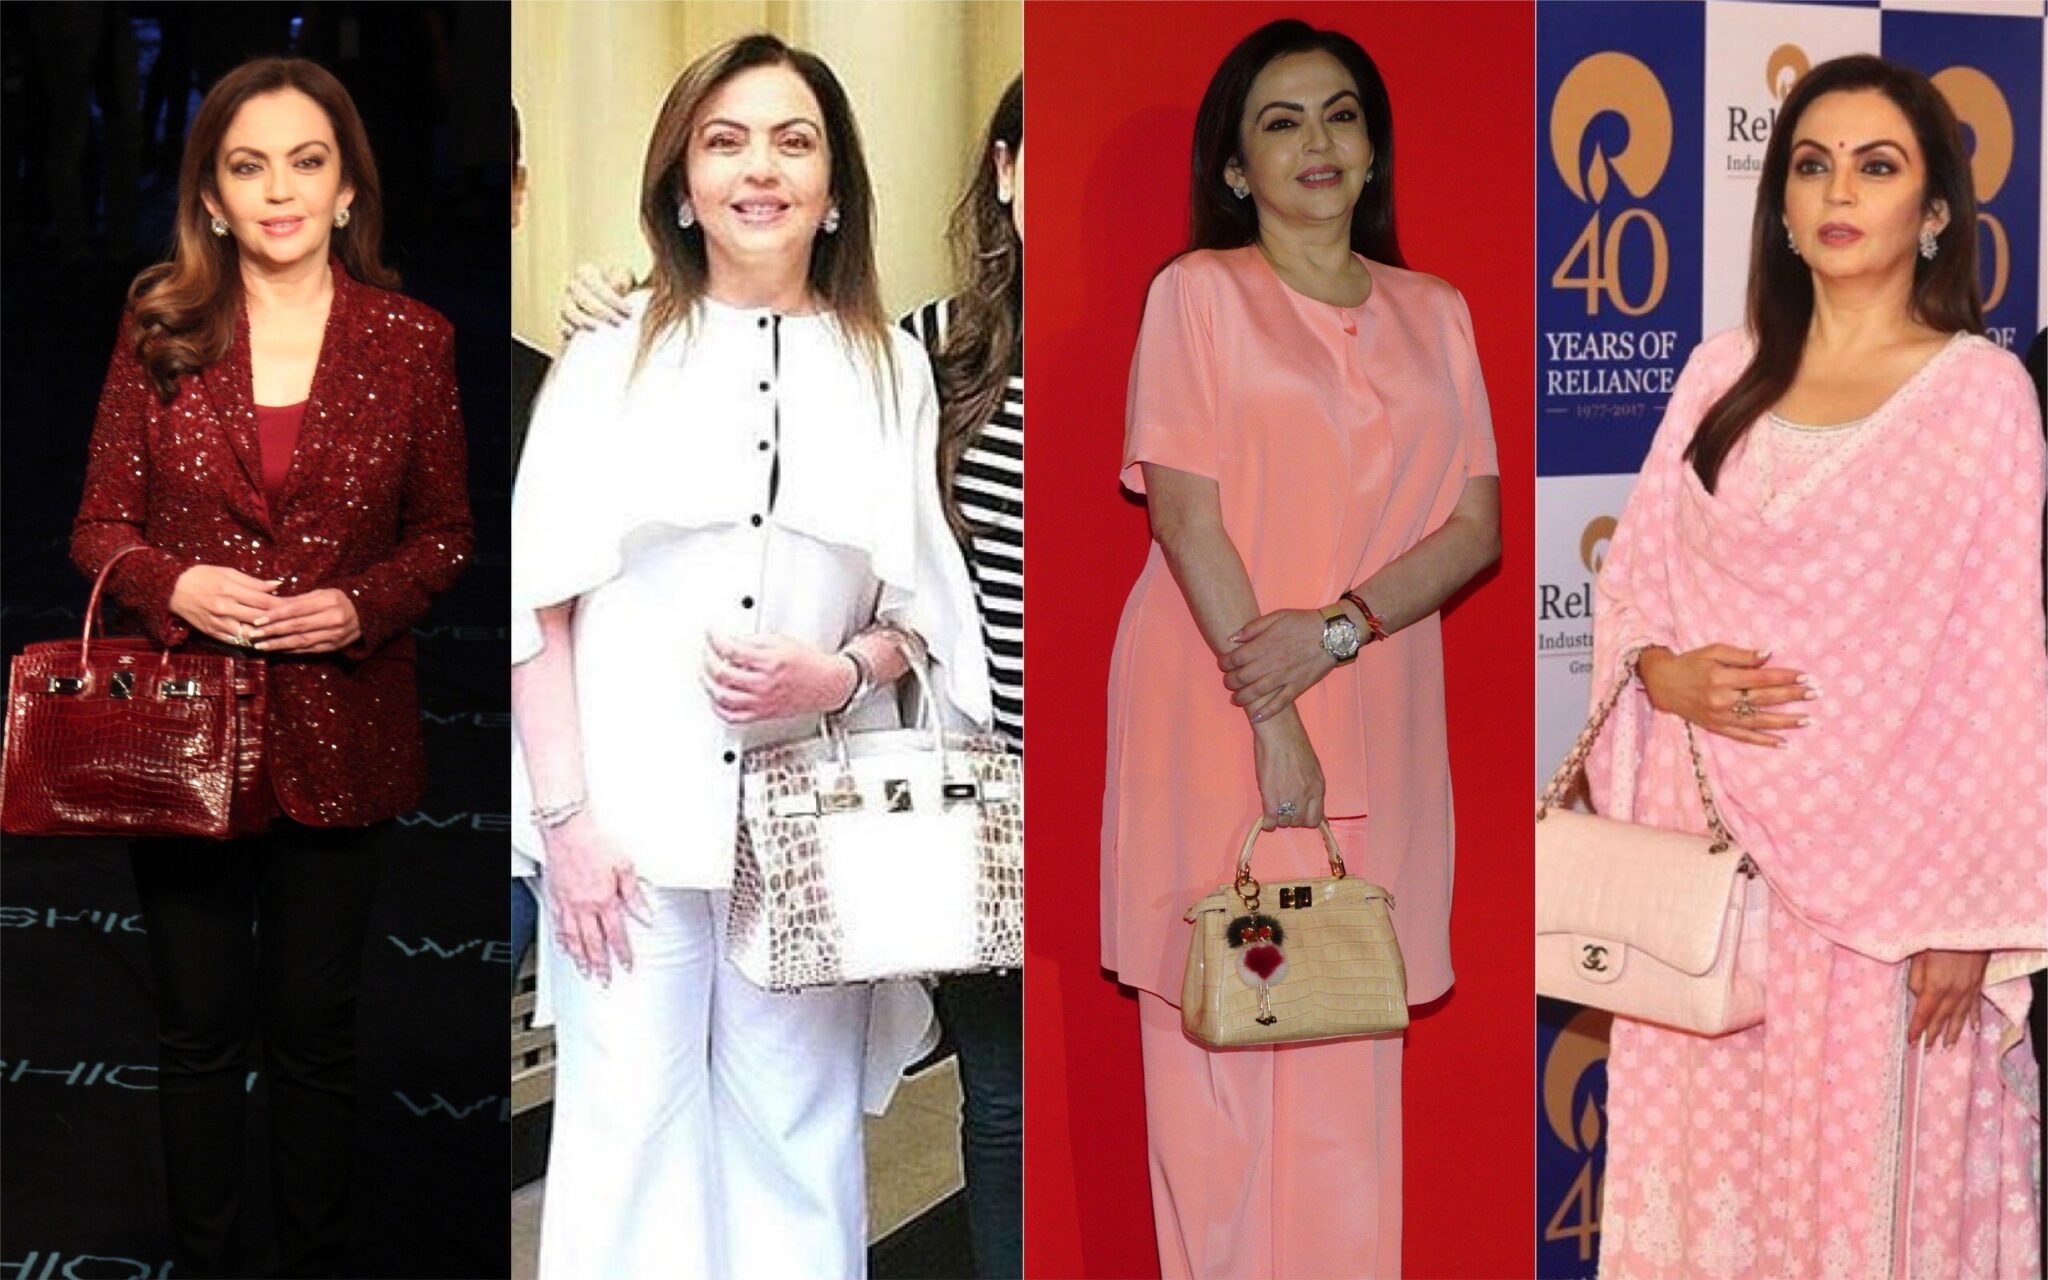 The most fashionable and designer Hermès handbag owners in Bollywood